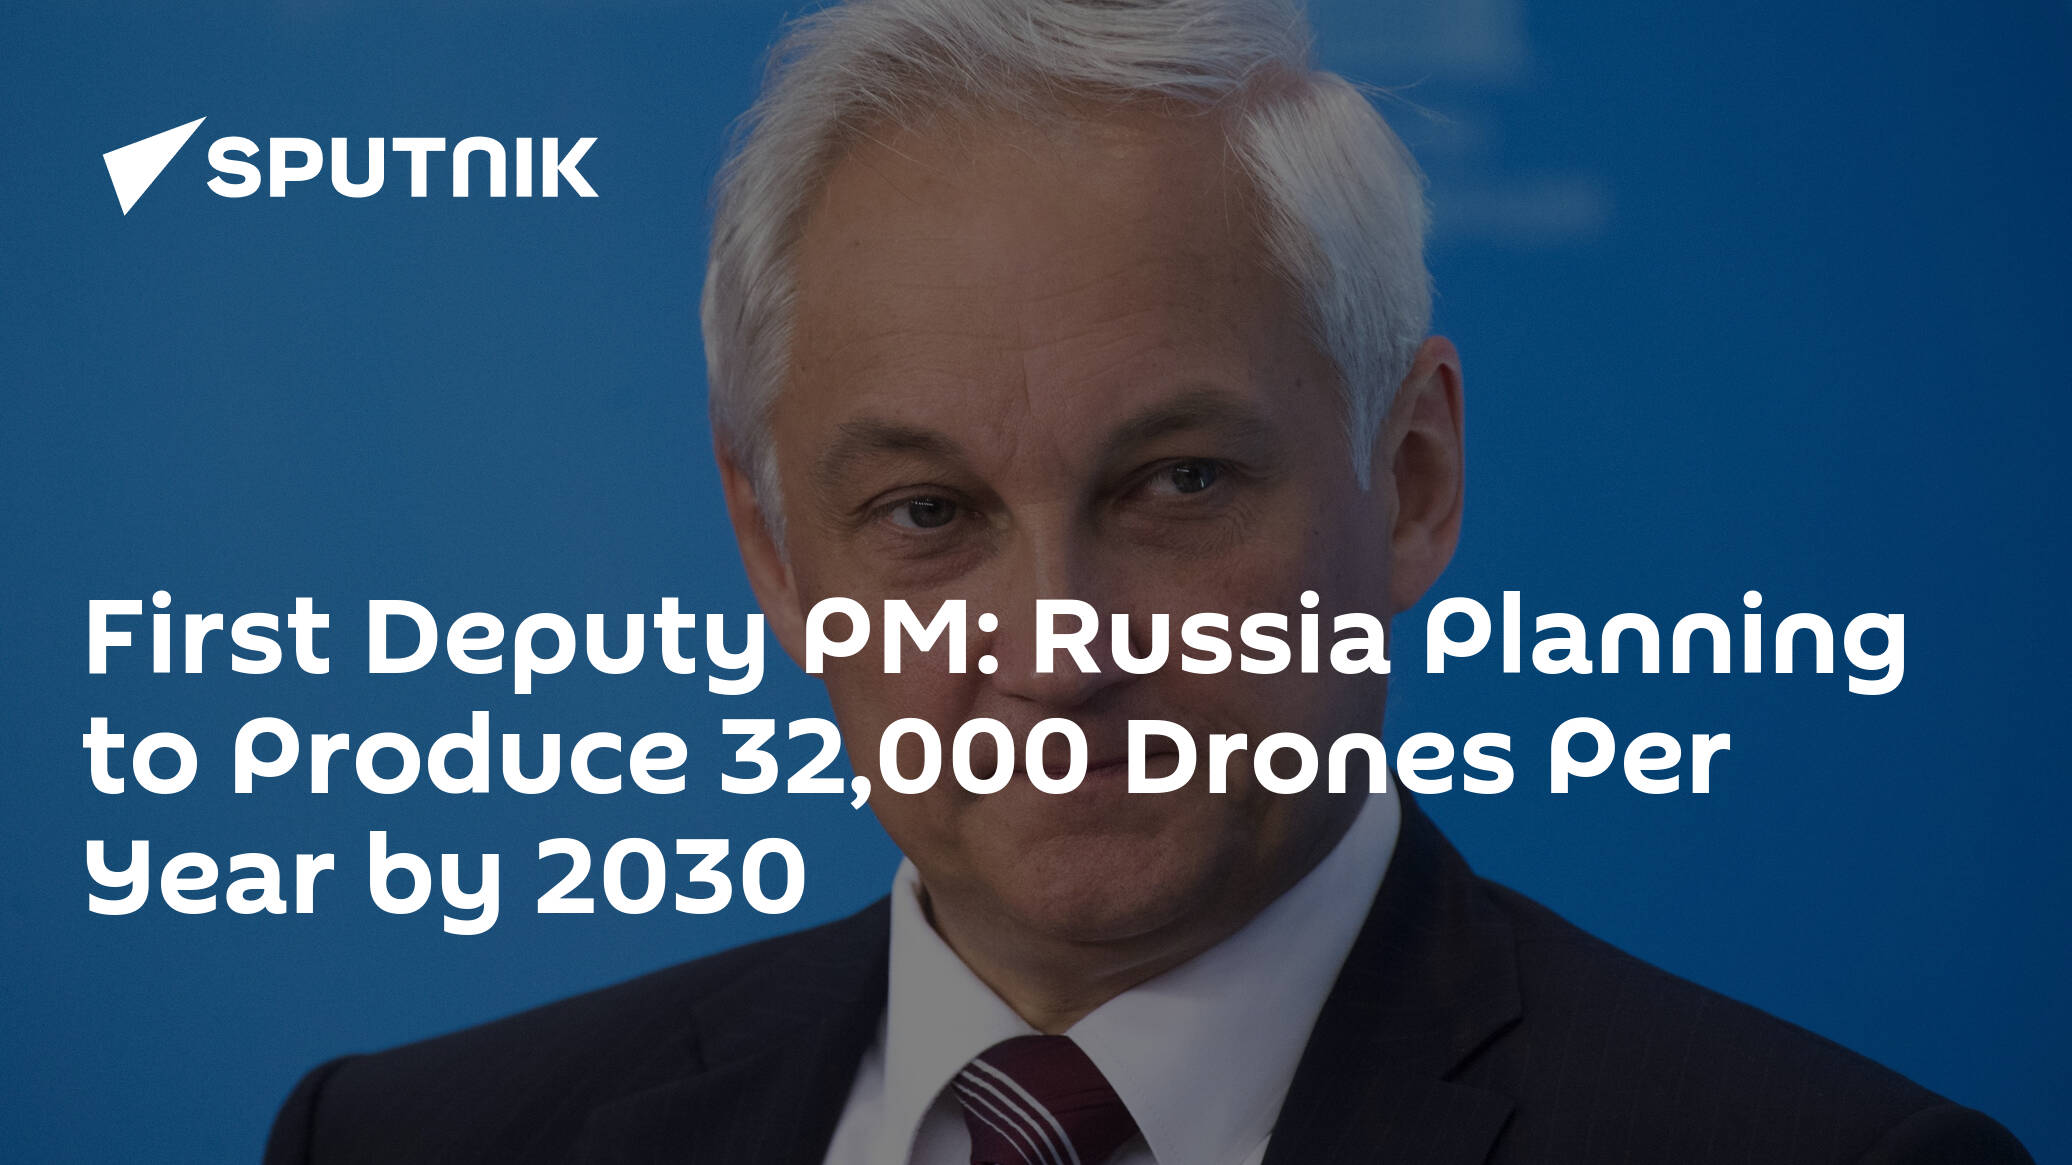 First Deputy PM: Russia Planning to Produce 32,000 Drones Per Year by 2030